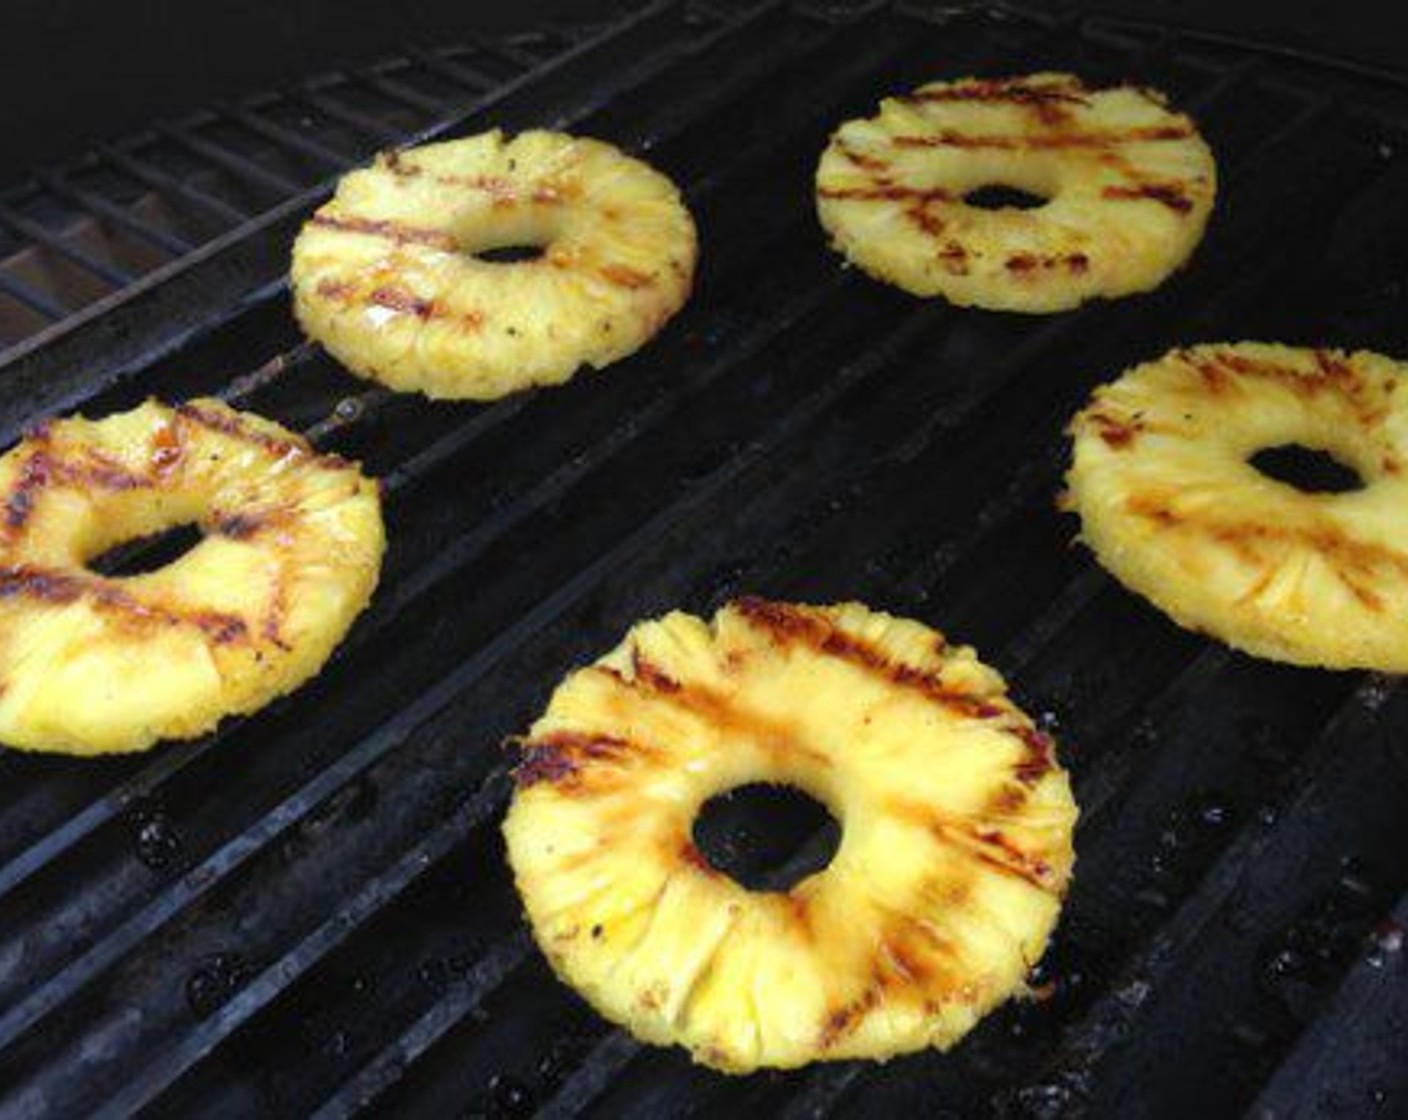 step 7 While they’re resting it’s time to grill the Pineapple Rings (1). Sprinkle each side with a little Brown Sugar (1/4 cup) and place on the grill. It only takes about 1 ½ minutes per side